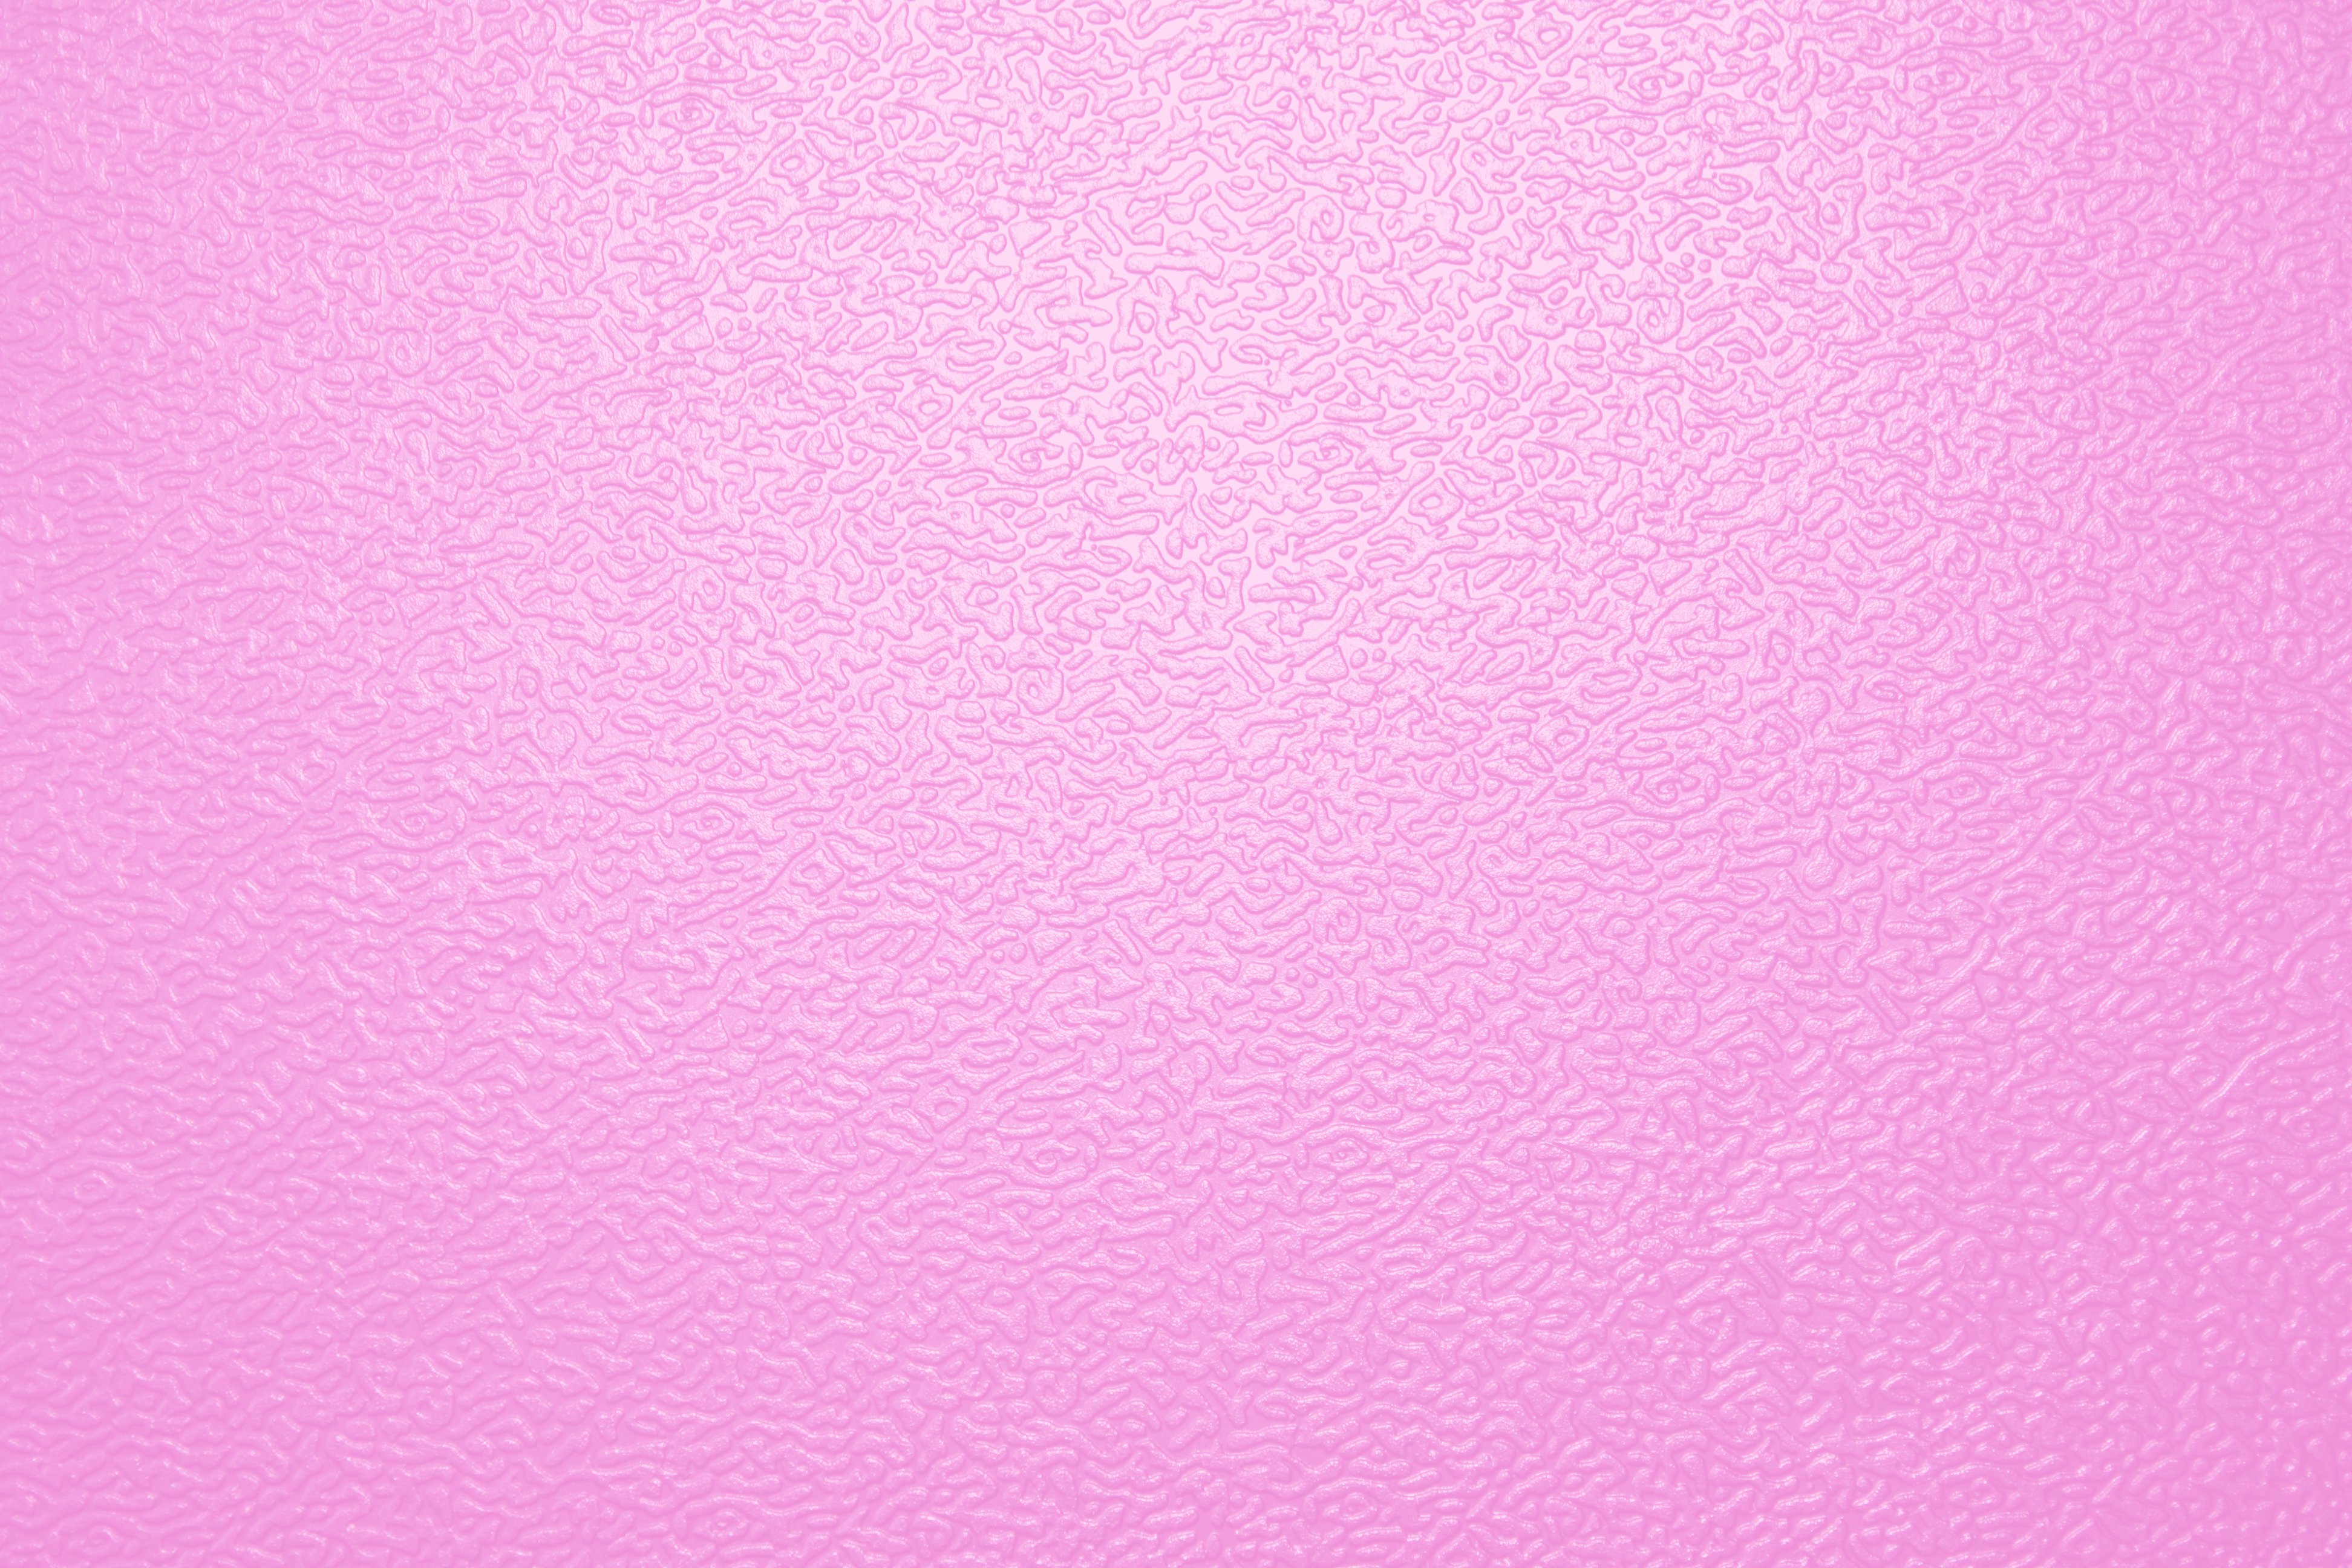 Textured Pink Plastic Close Up Picture Photograph Photos 3888x2592